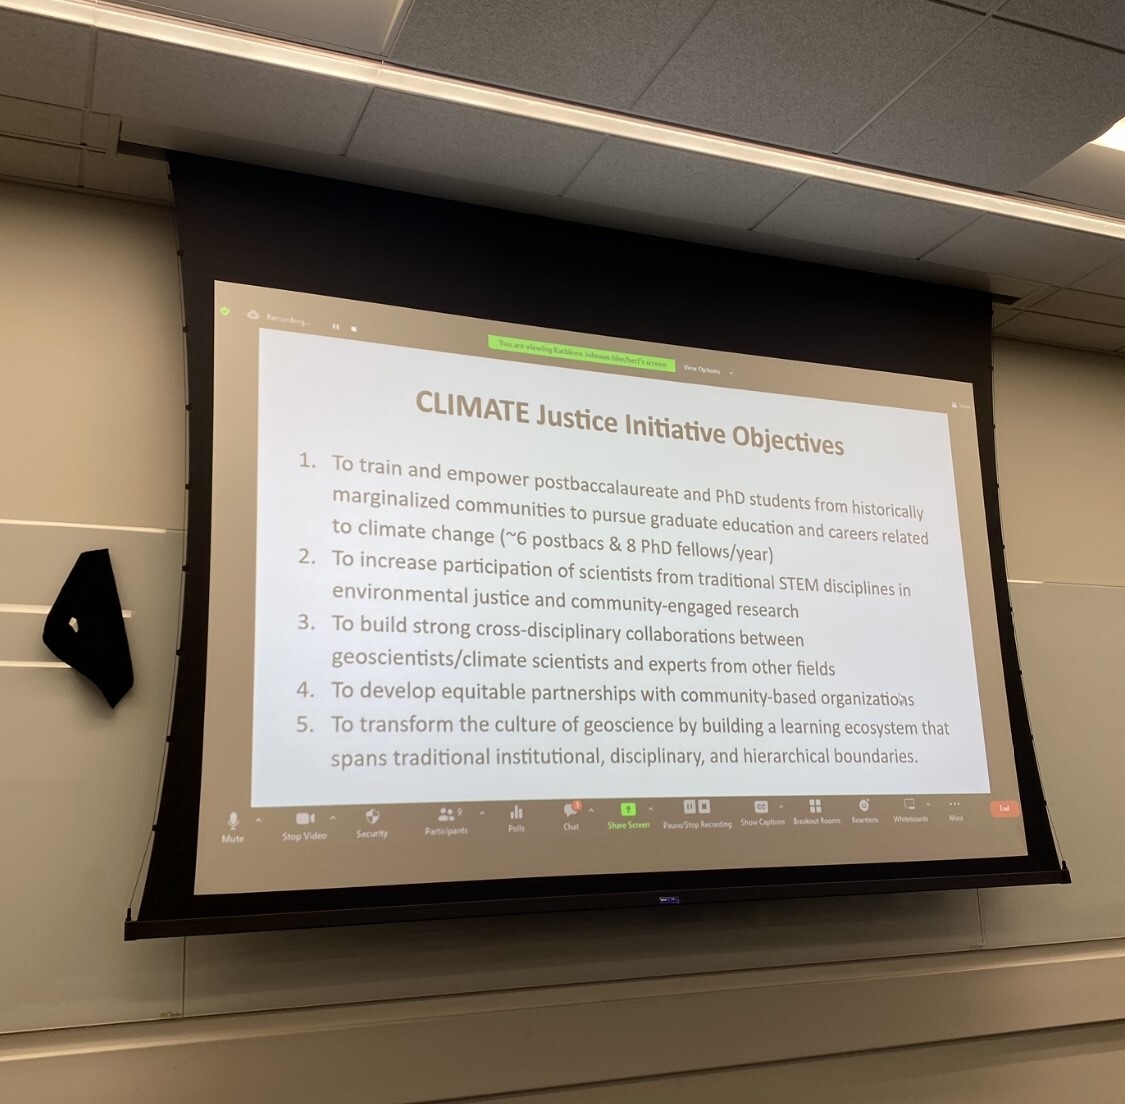 CLEANR Director Dr. Gregg Macey to serve on CLIMATE Justice Initiative Steering Committee. Learn more about the program